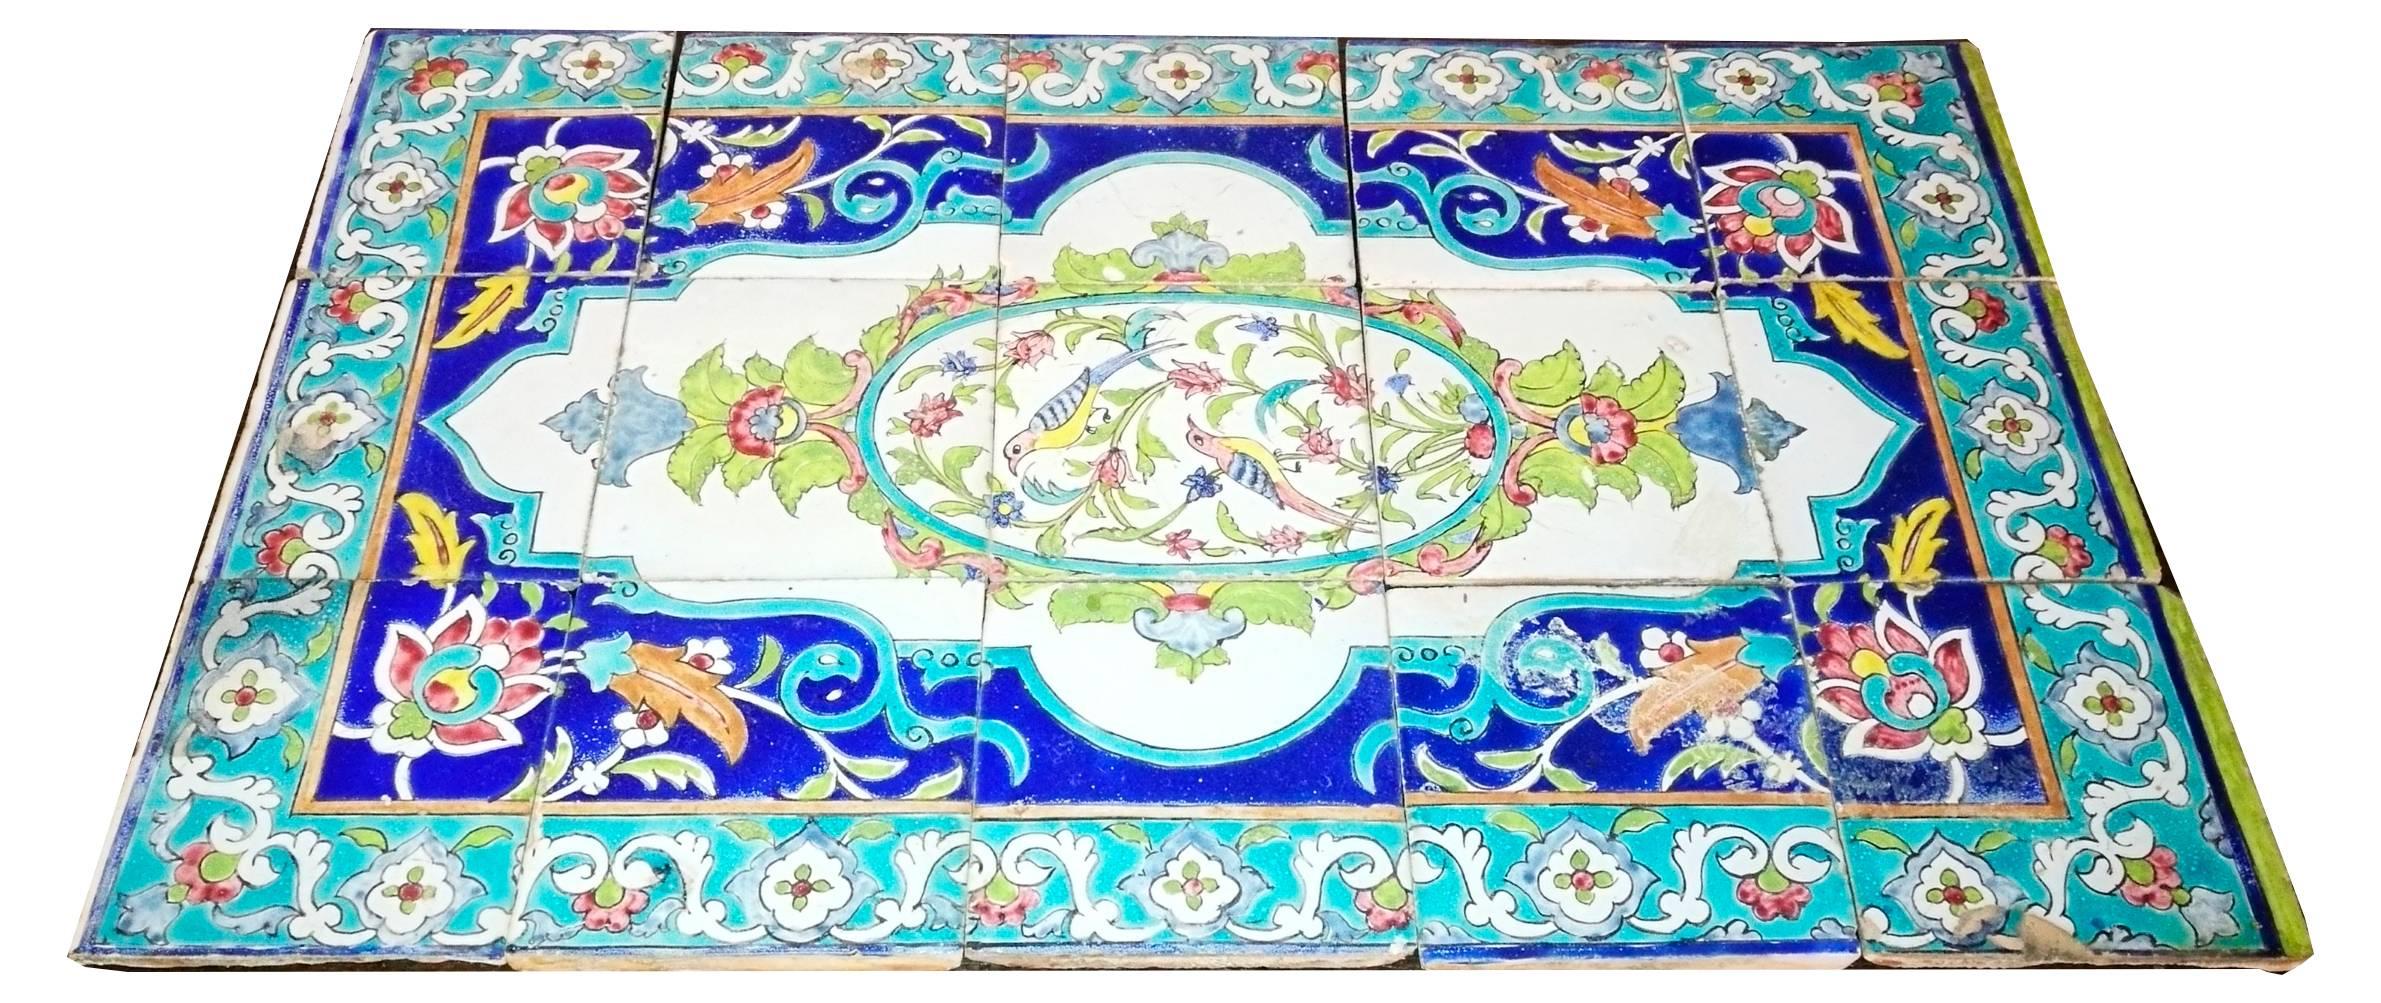 The panel is composed of a total of 15, measure 15 x 15 cm ceramic tiles. Iznik pottery dates back to the late 15th century and was highly prized by Ottoman sultans, admired for their clean white base and unique technique. Today they are used as